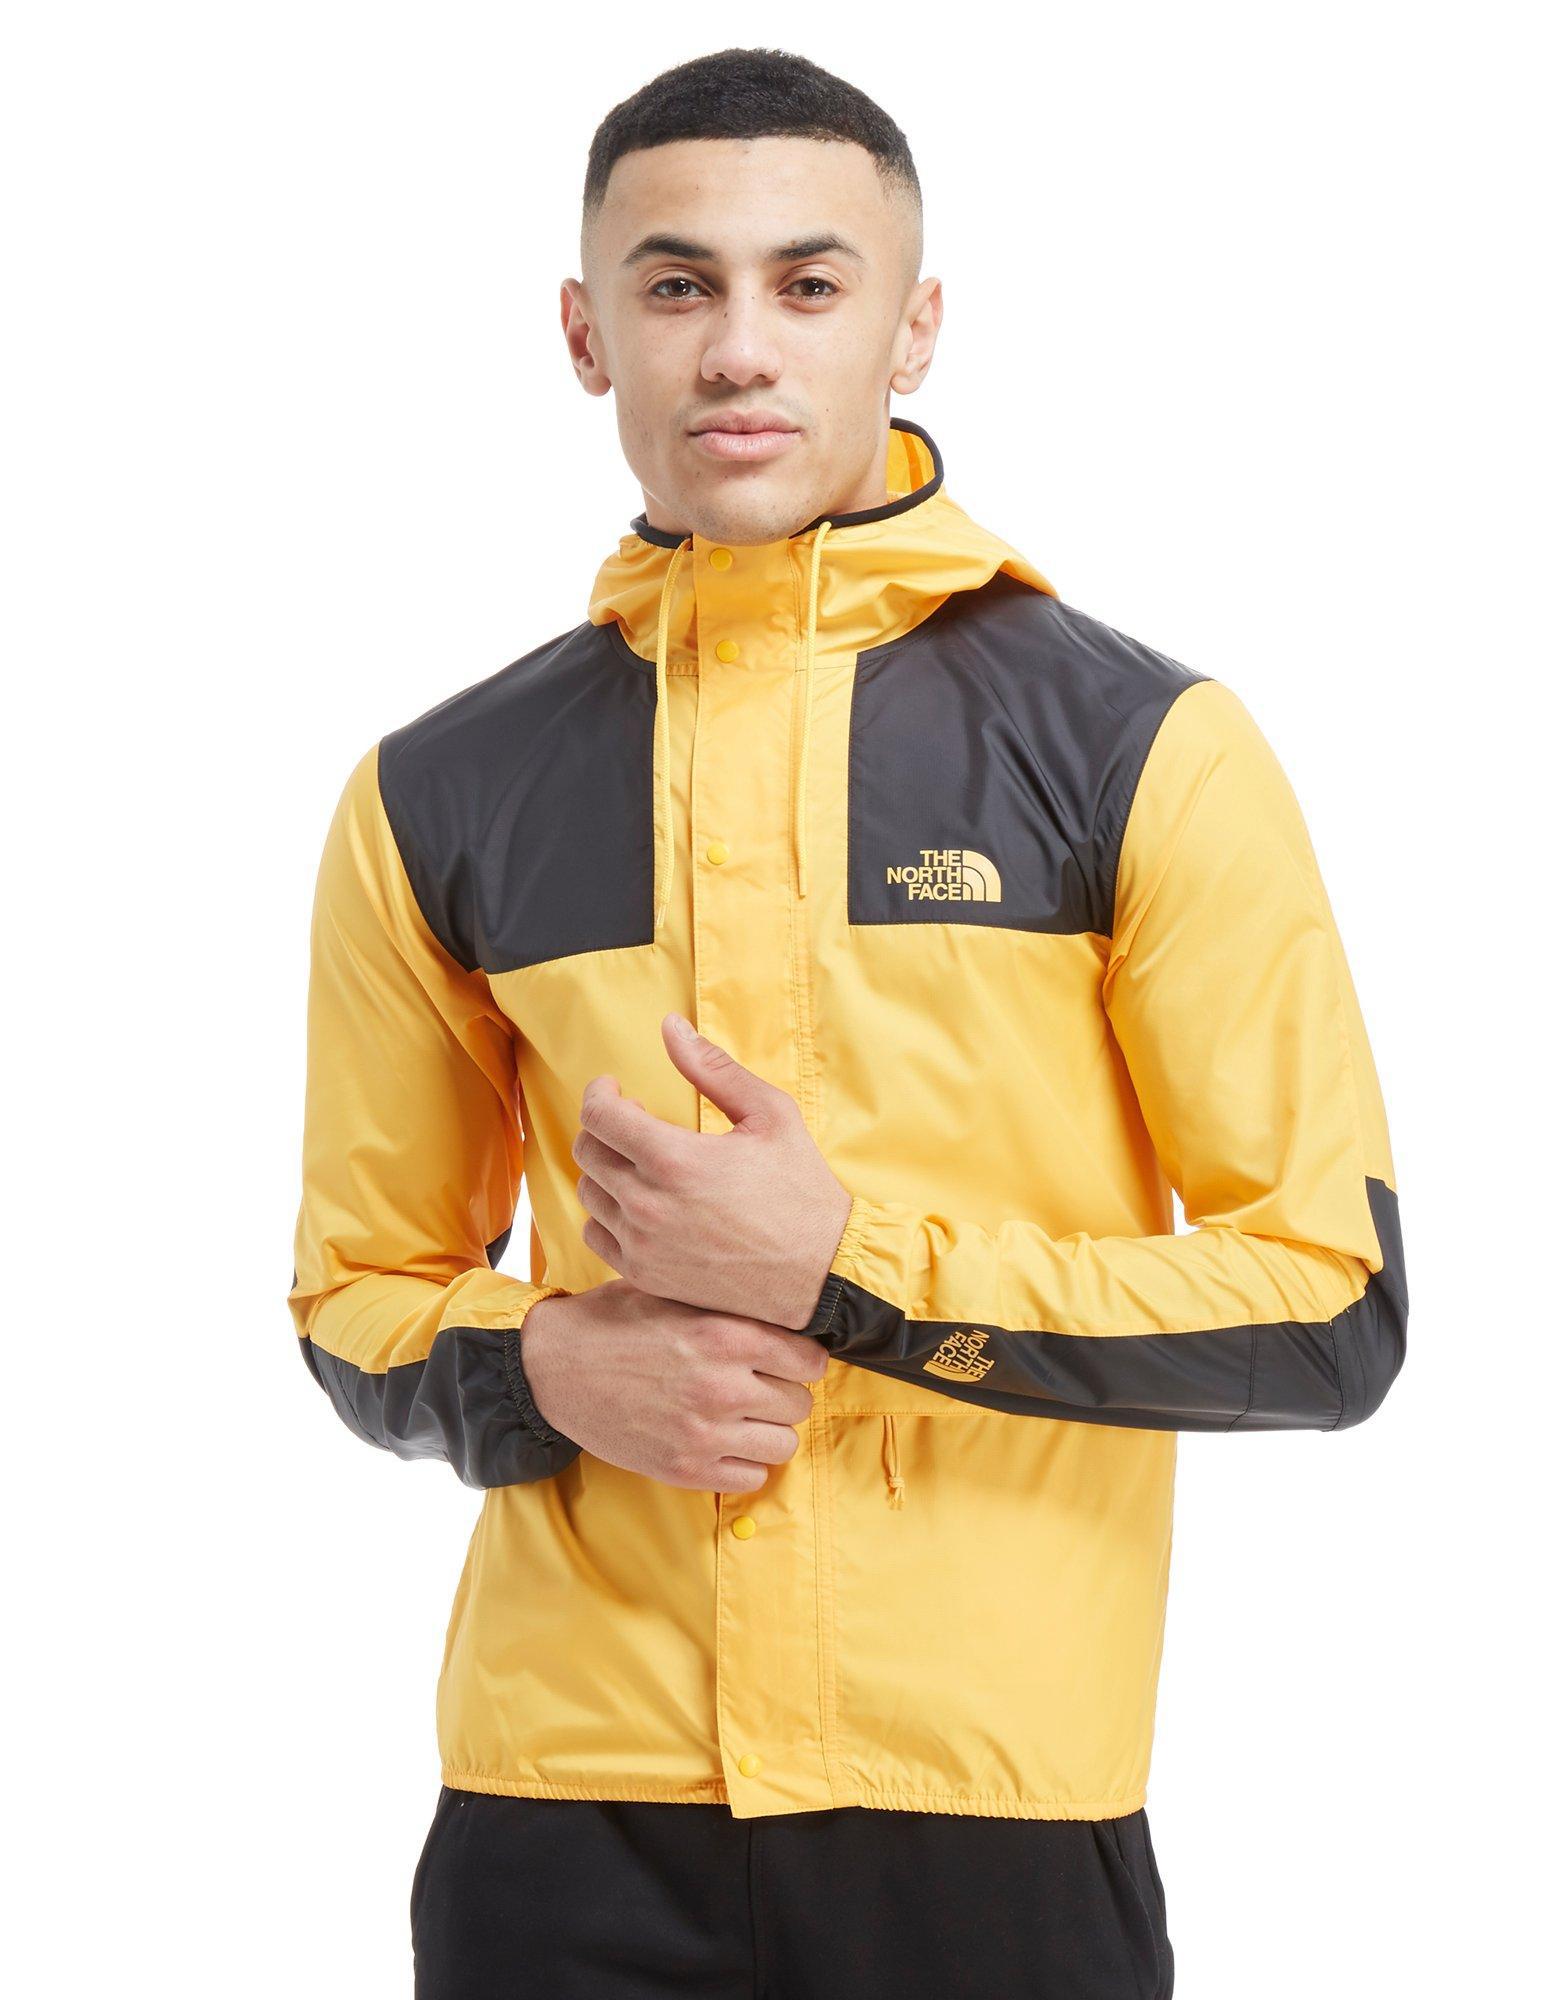 North Face 1985 Yellow Factory Sale, SAVE 60%.